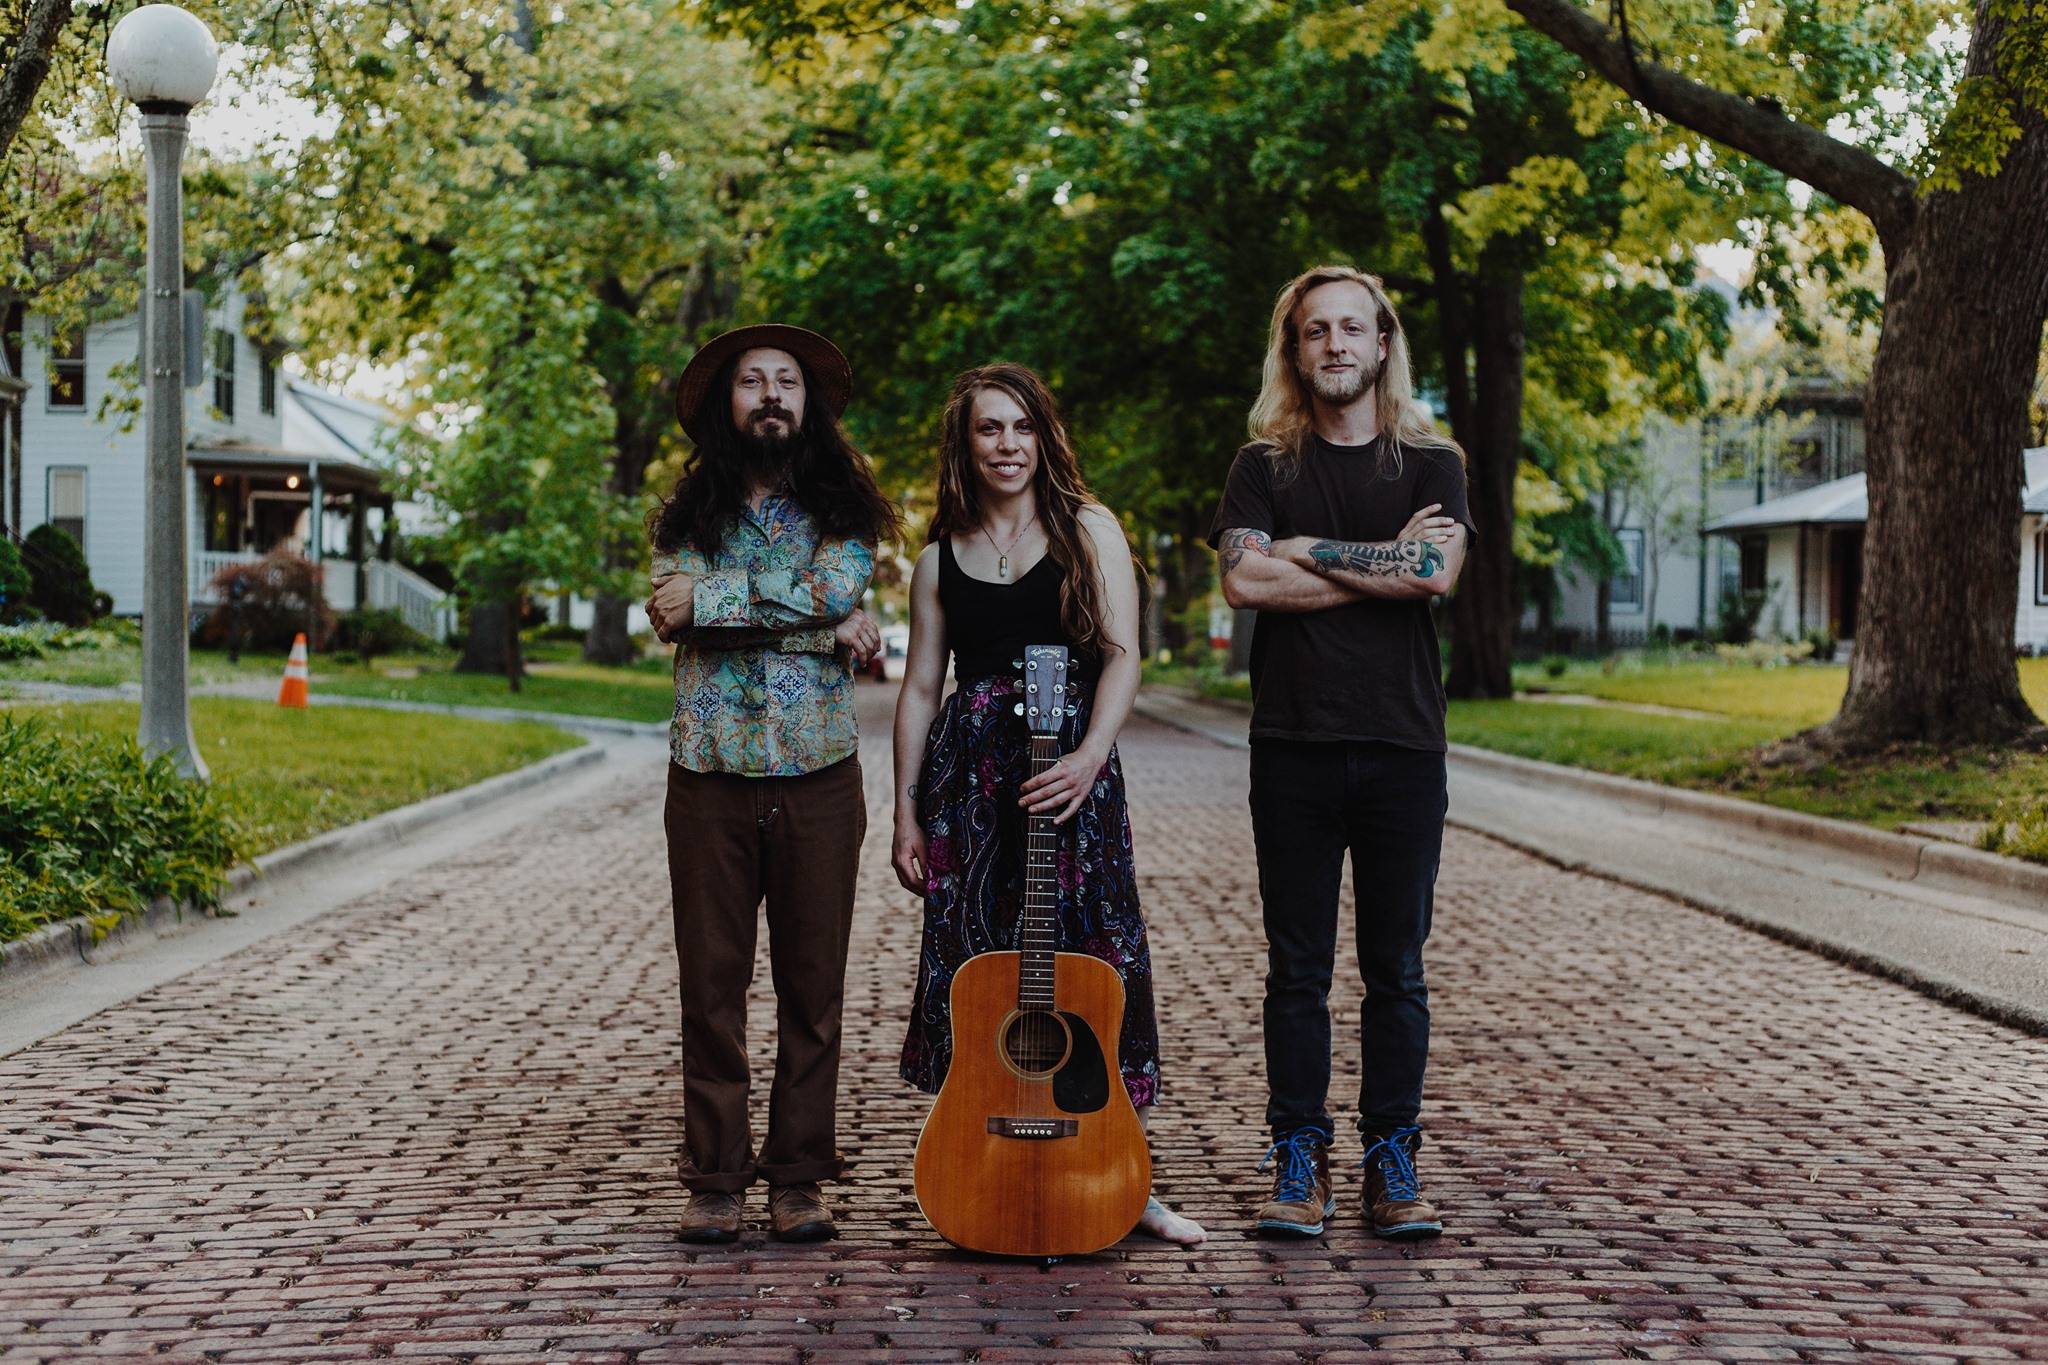 Three people stand in the middle of a brick-paved road. The woman in the middle is holding a guitar by her feet. Image by Veronica Mullen.